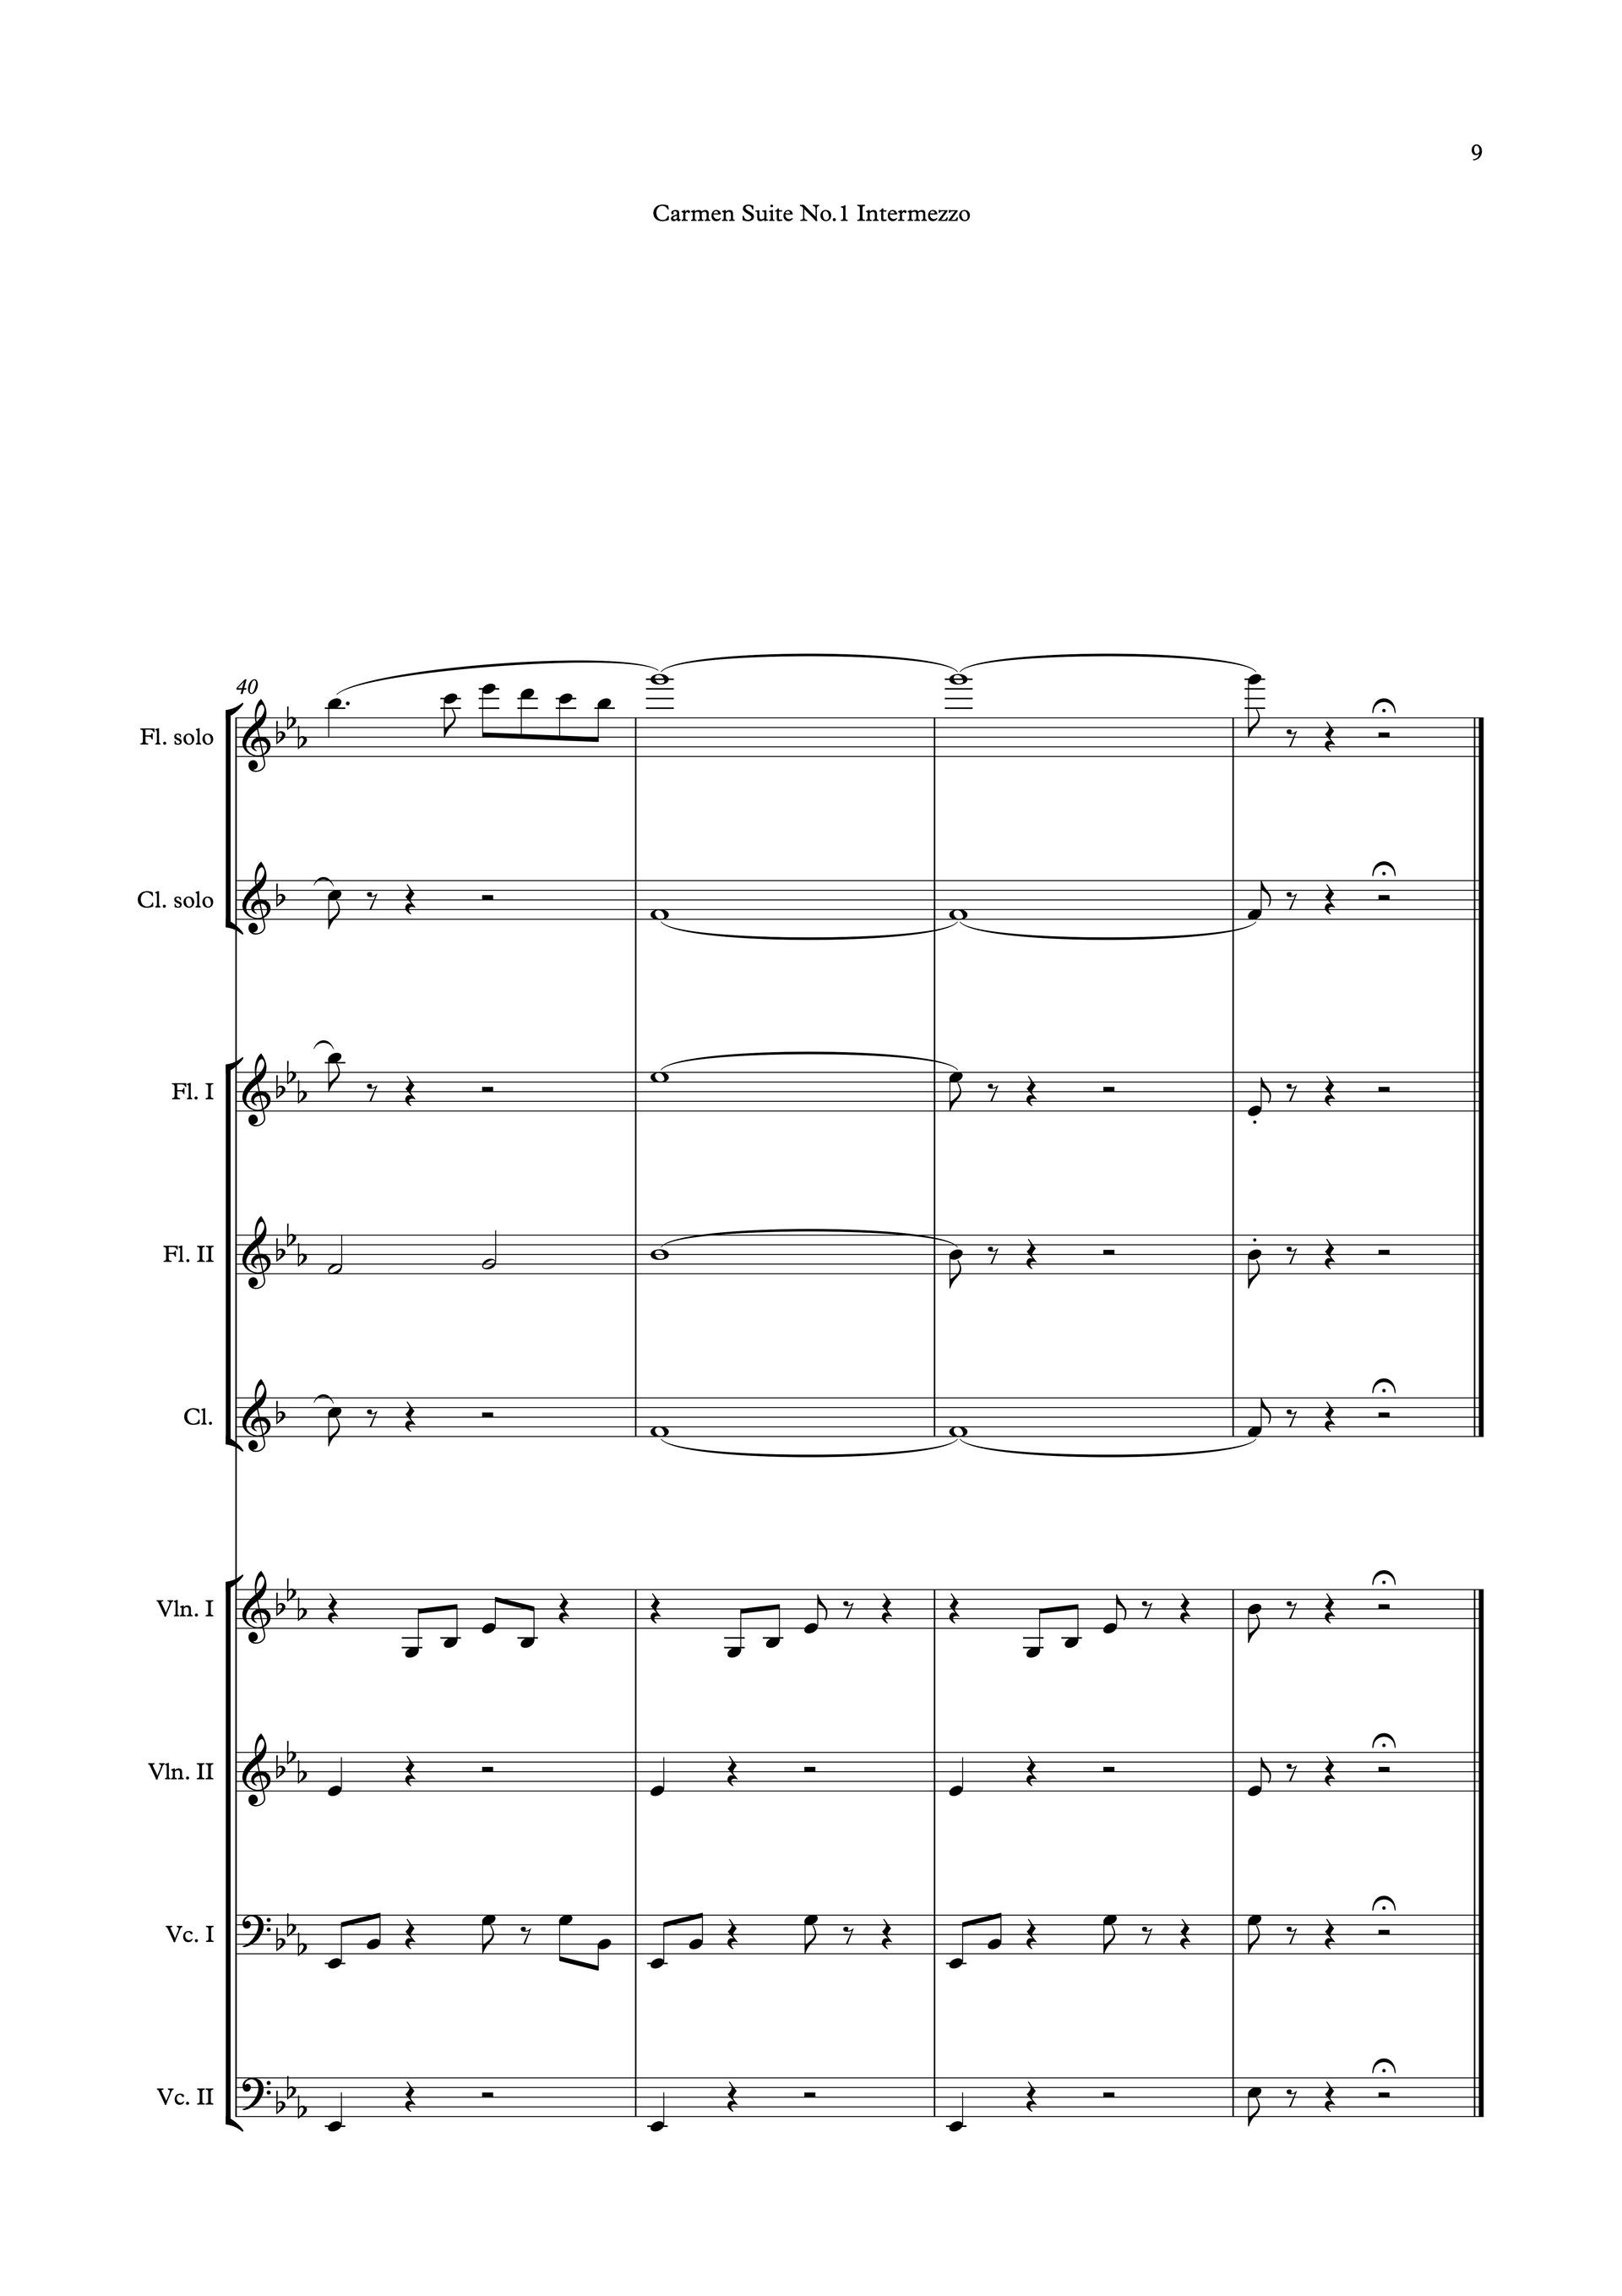 Sheet music of Bijet's Carmen Suite No. 1, Intermezzo arranged for school band preview page 9